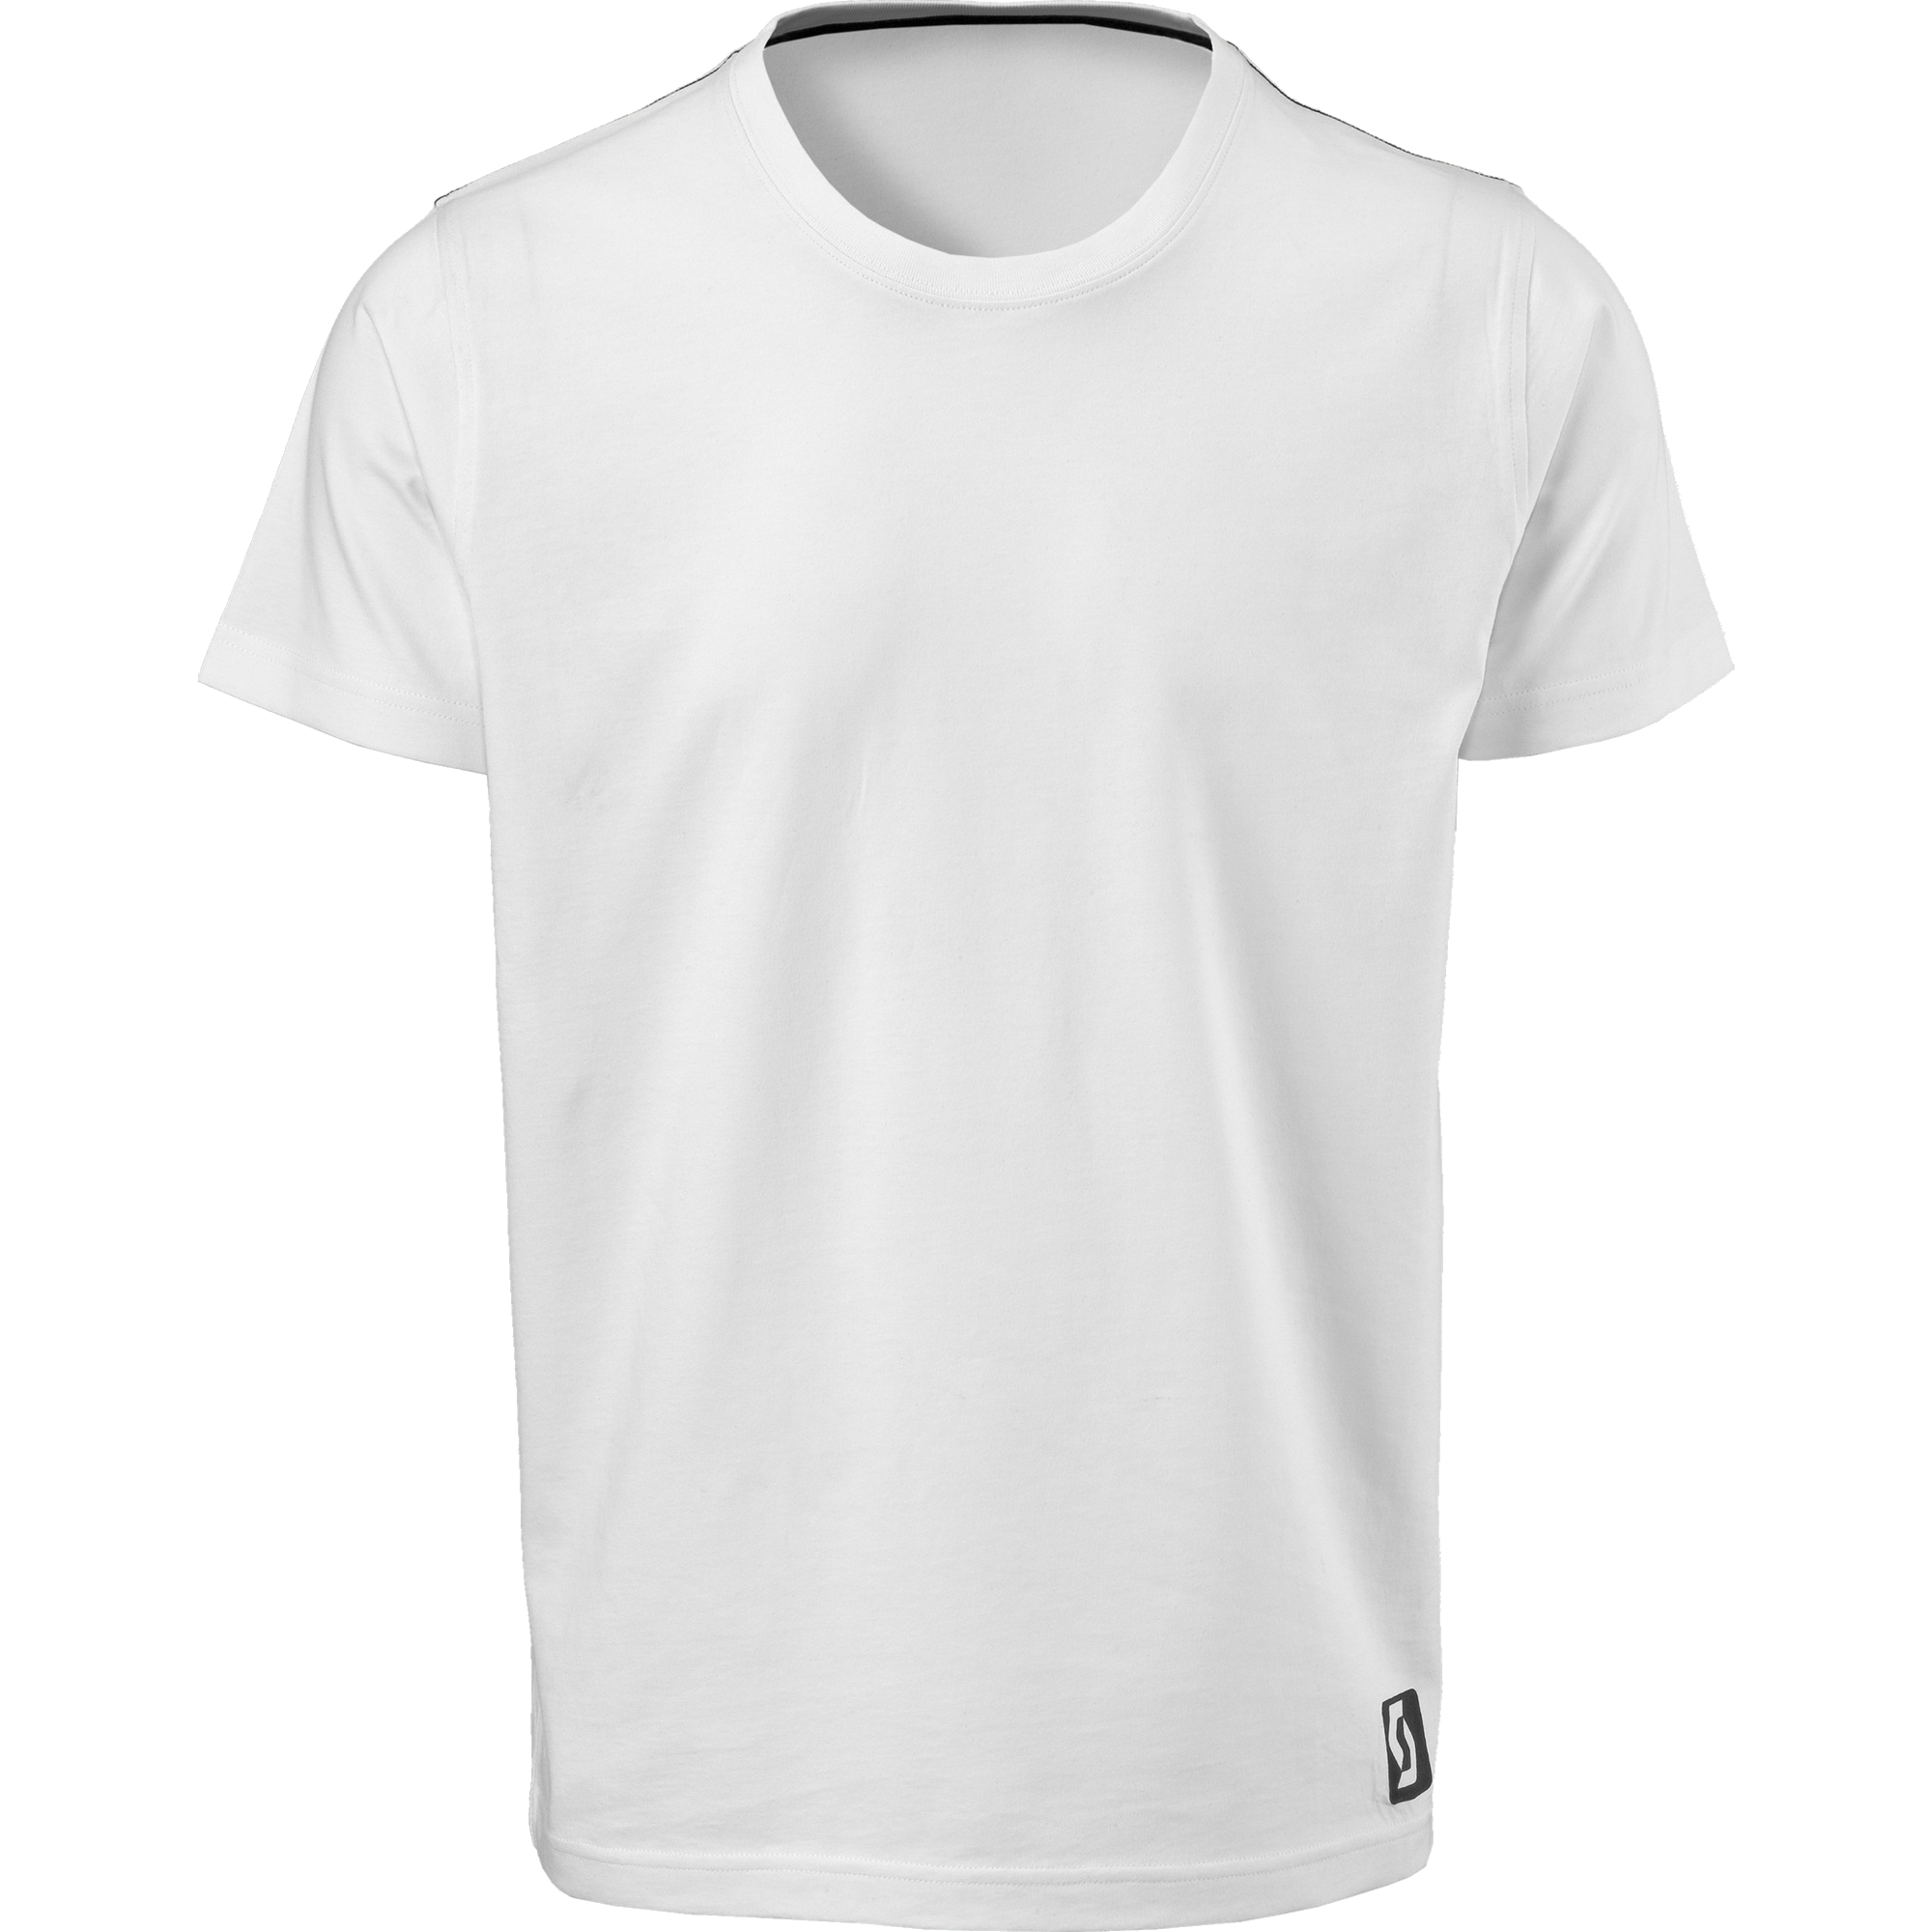 Download Blank T Shirt PNG, Blank T Shirt Transparent Background ...